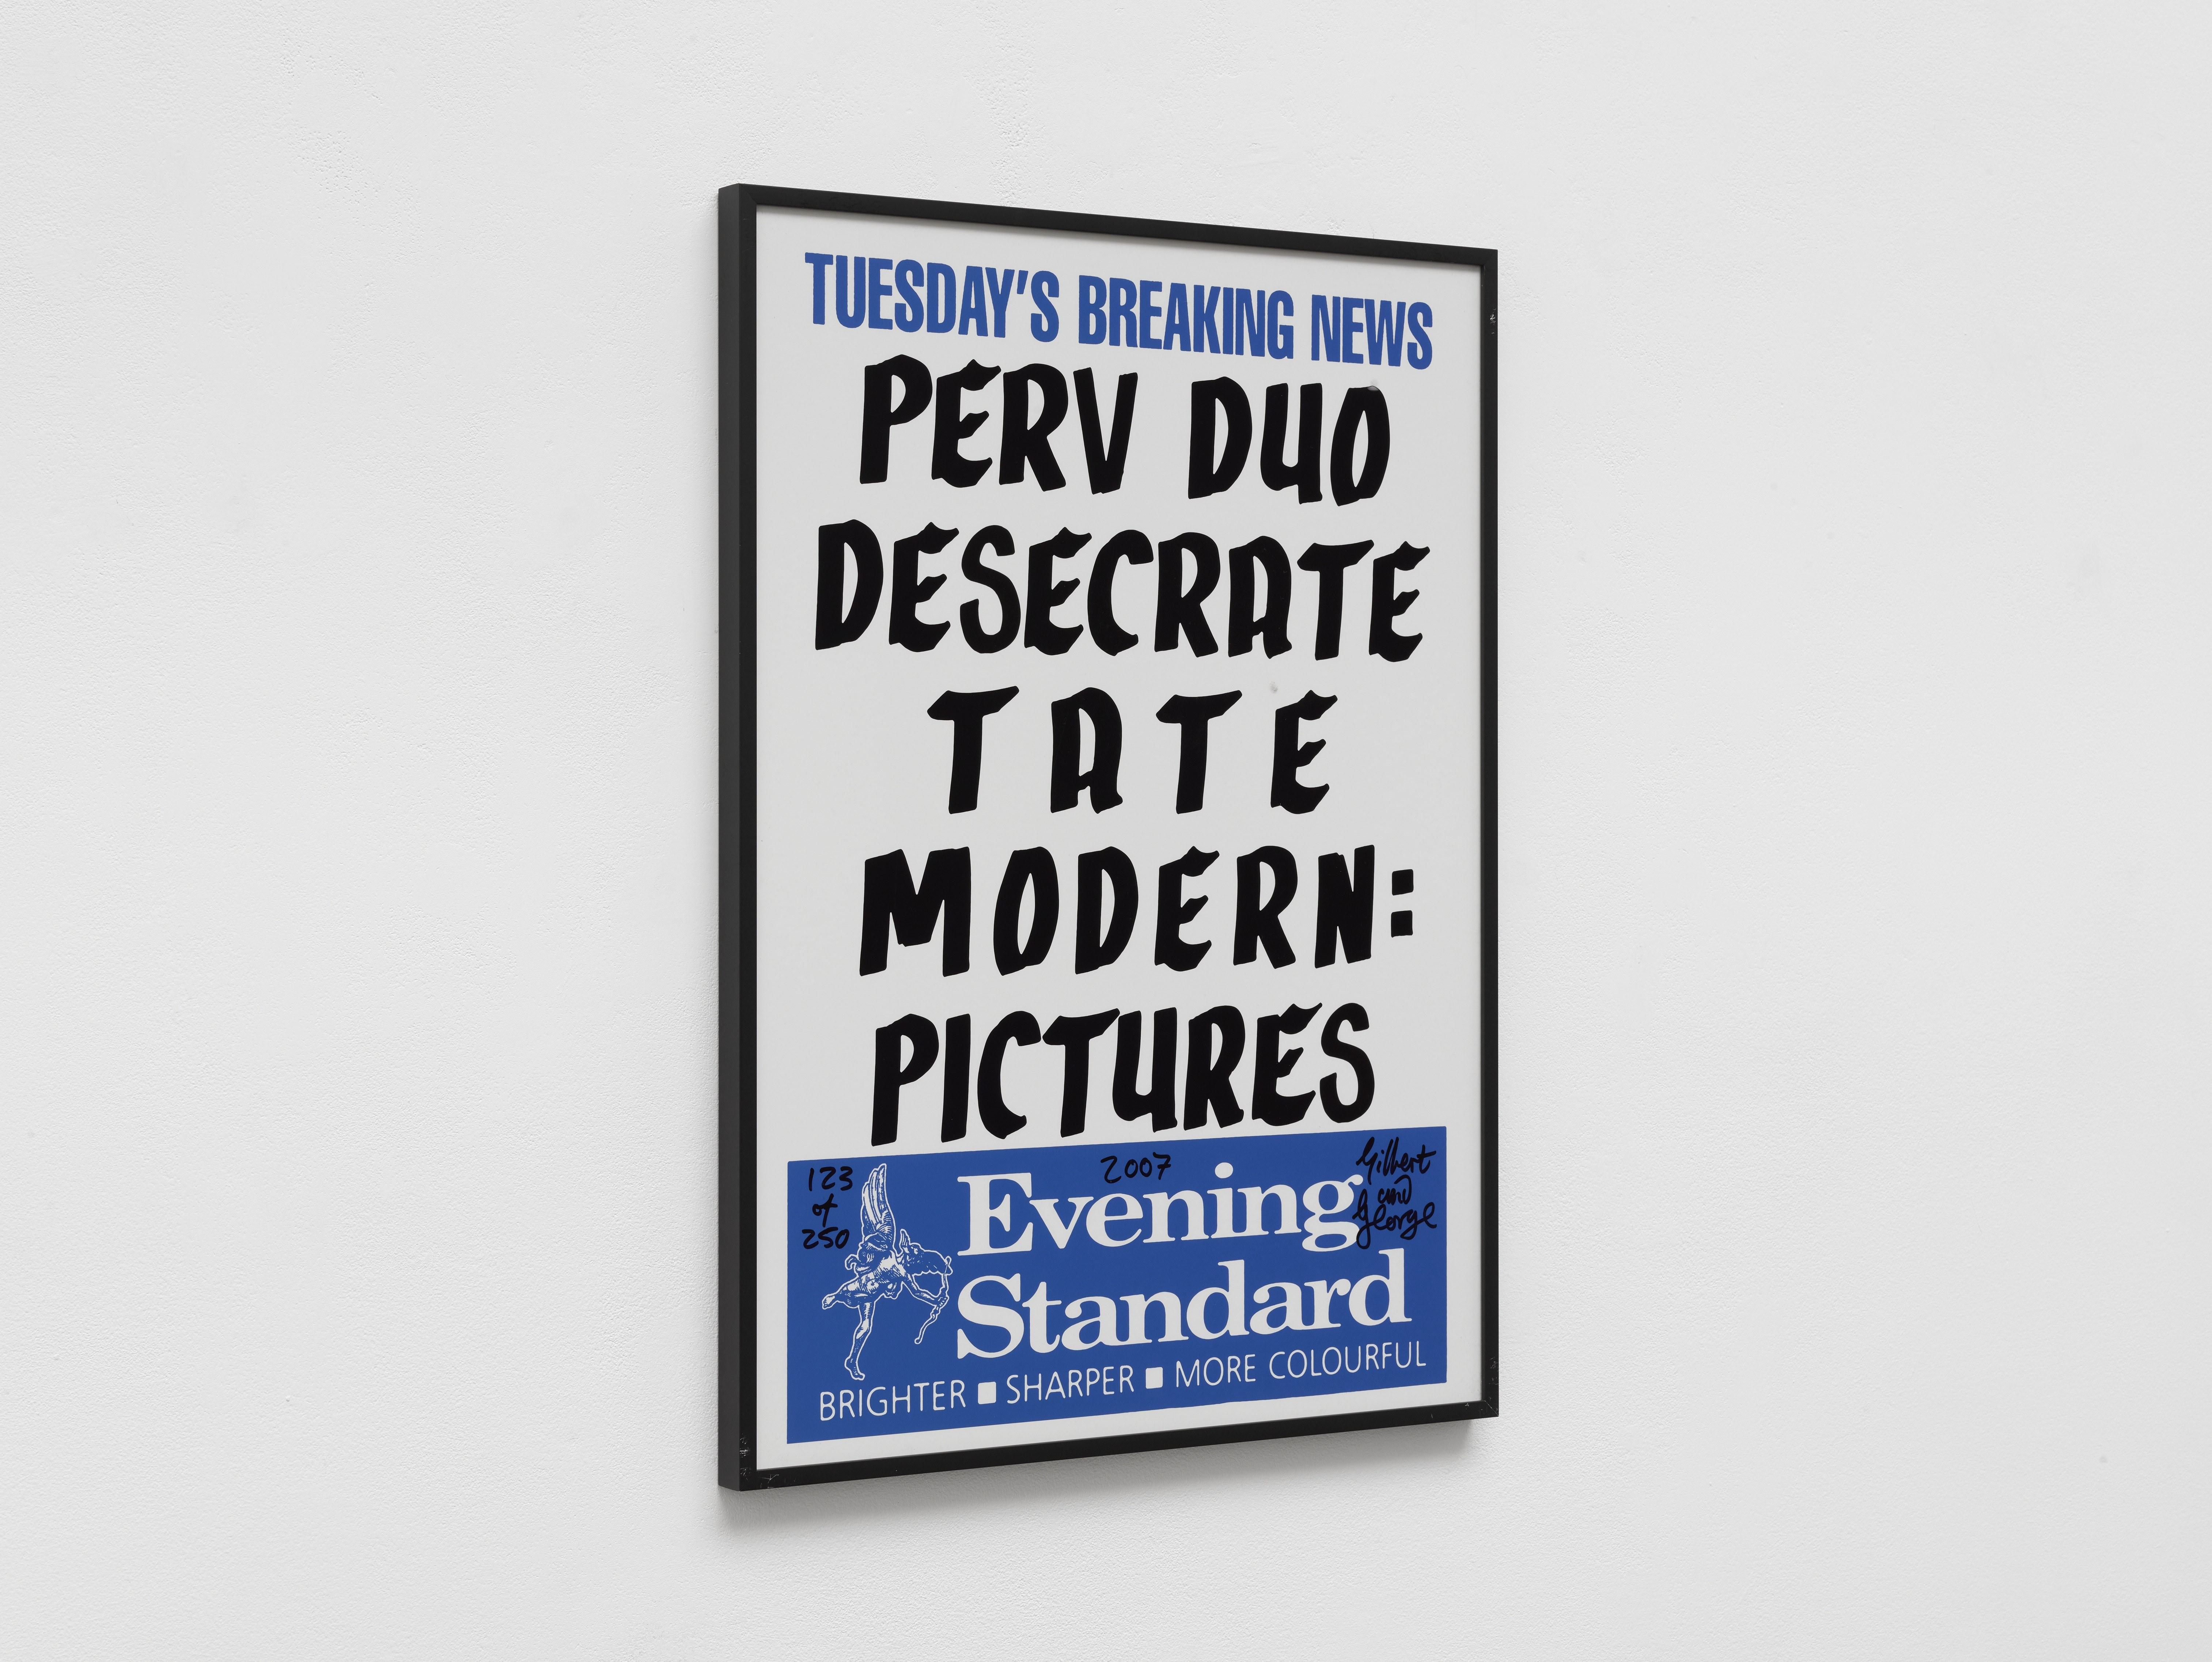 Gilbert & George - Perv Duo Desecrate Tate Modern: Pictures - 2